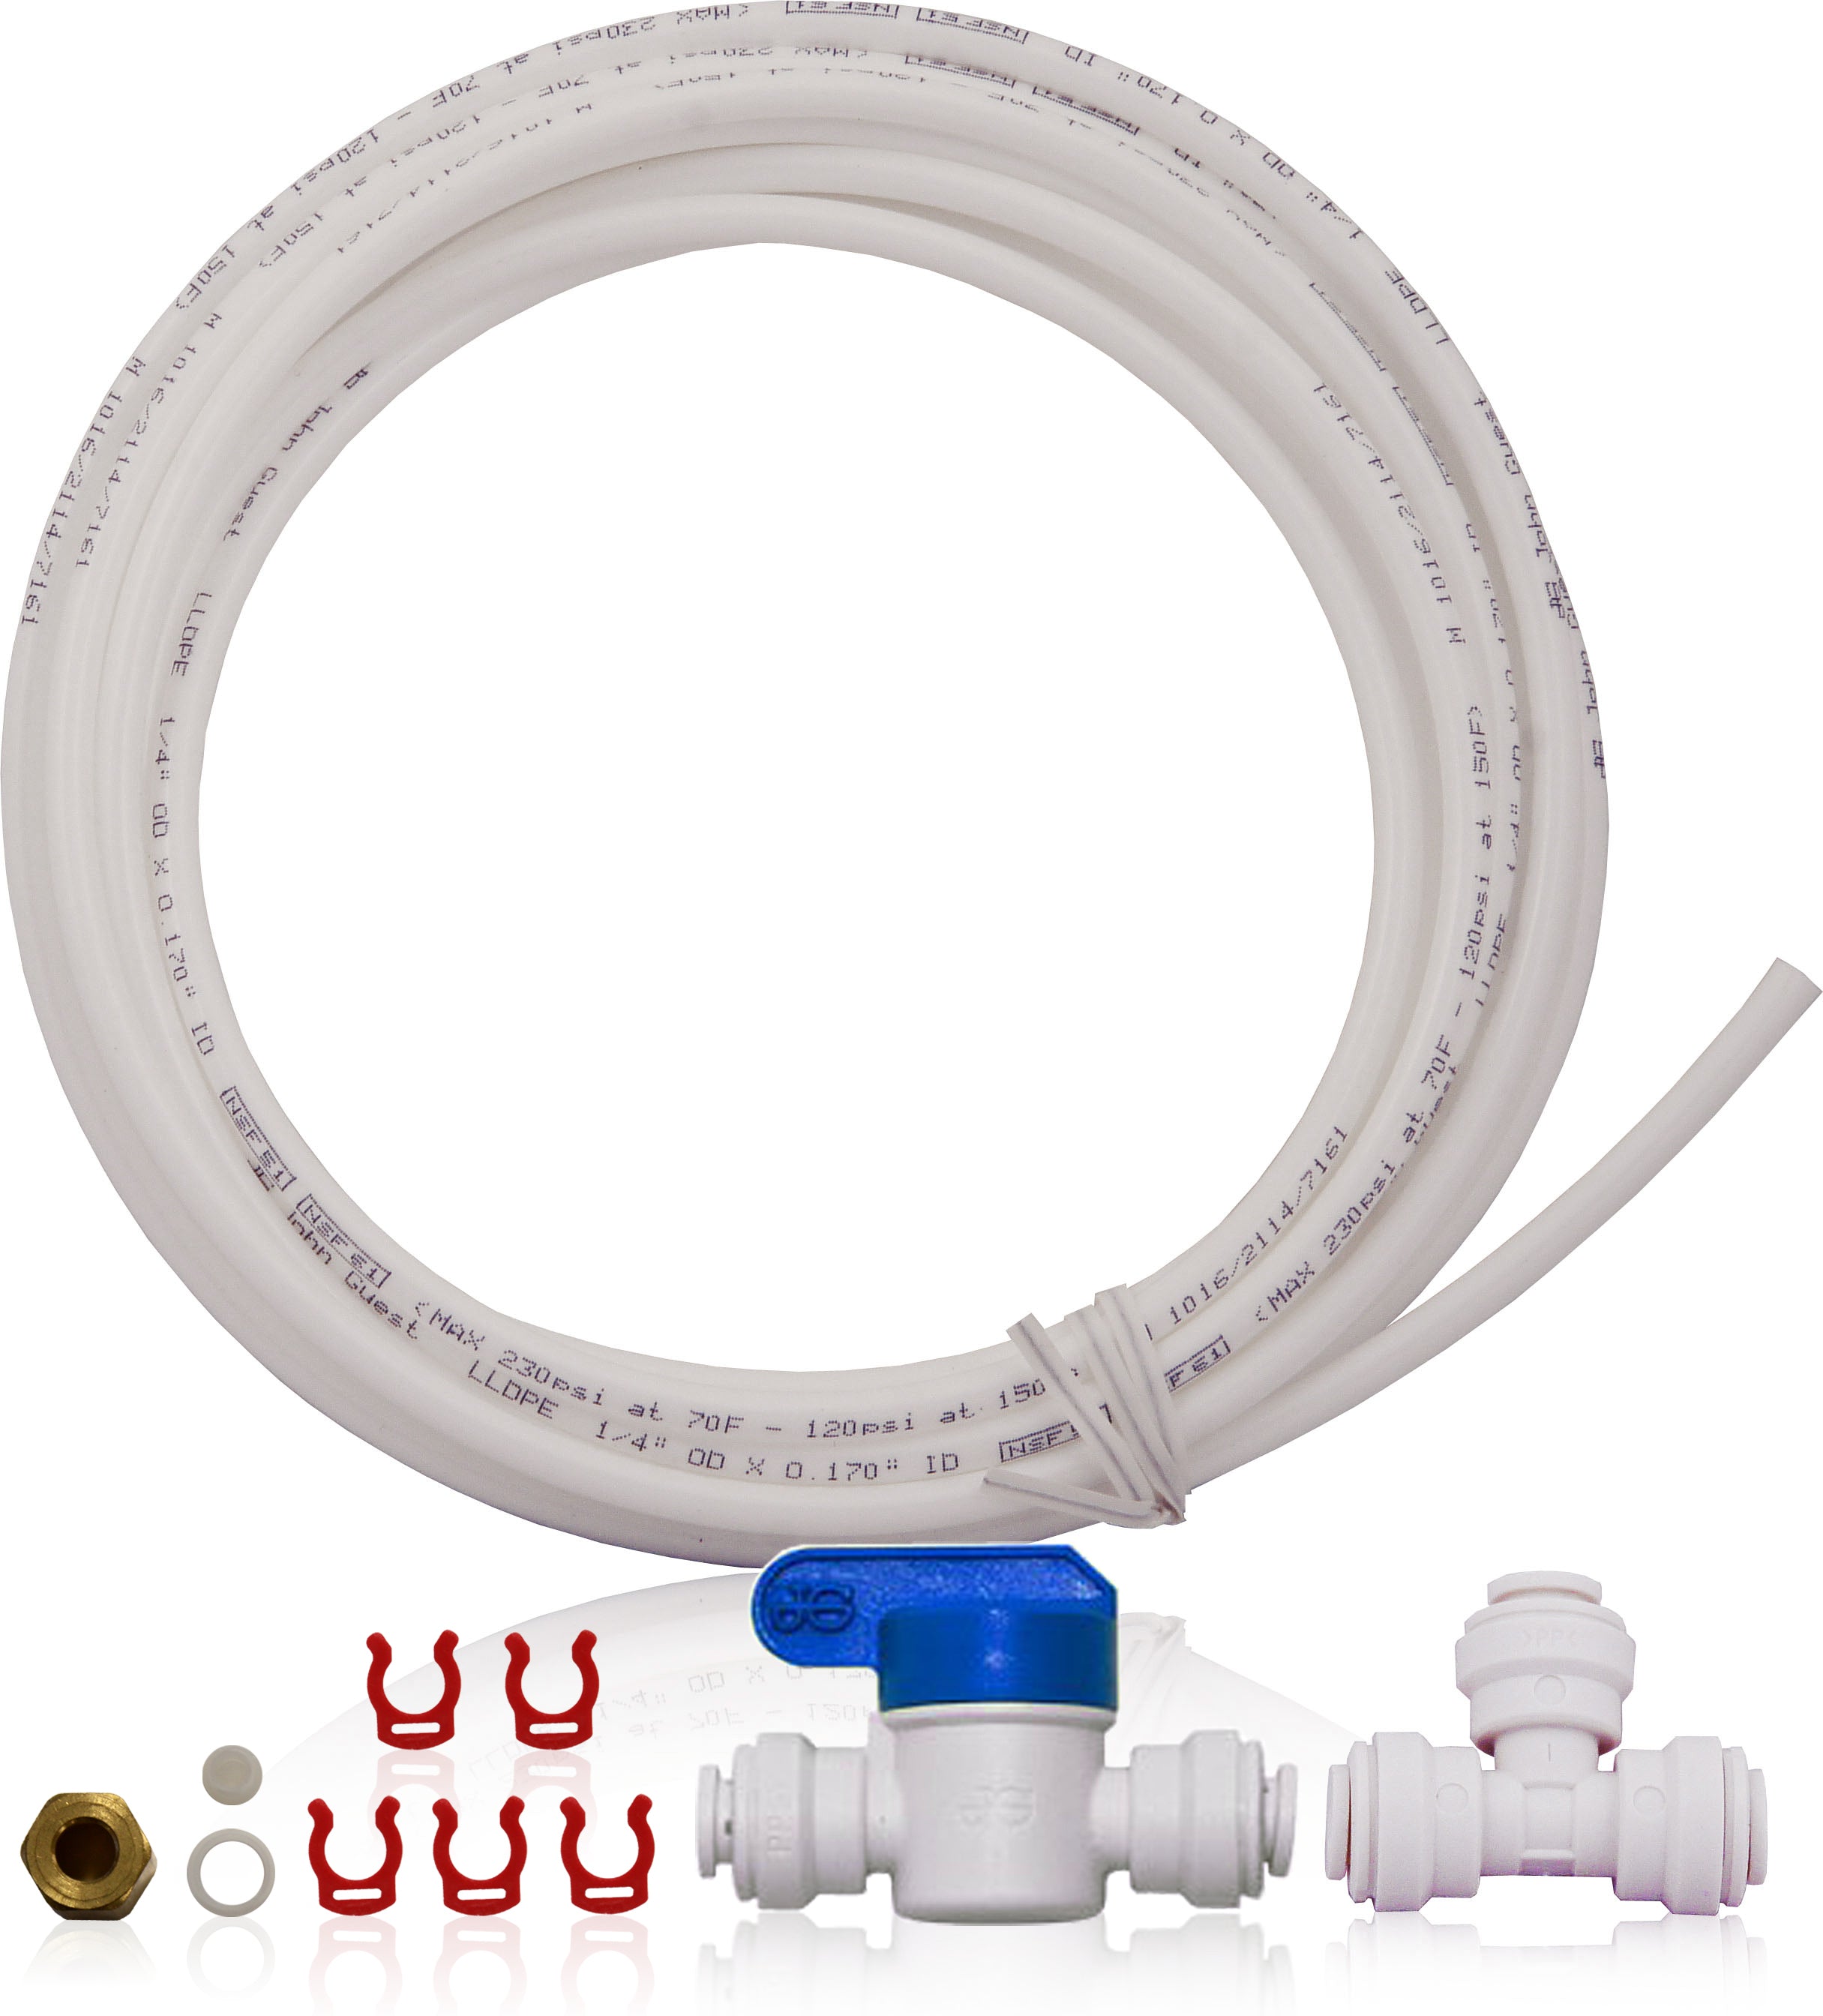 Icemaker Kit for APEC Reverse Osmosis System - 1/4" OD Tubing